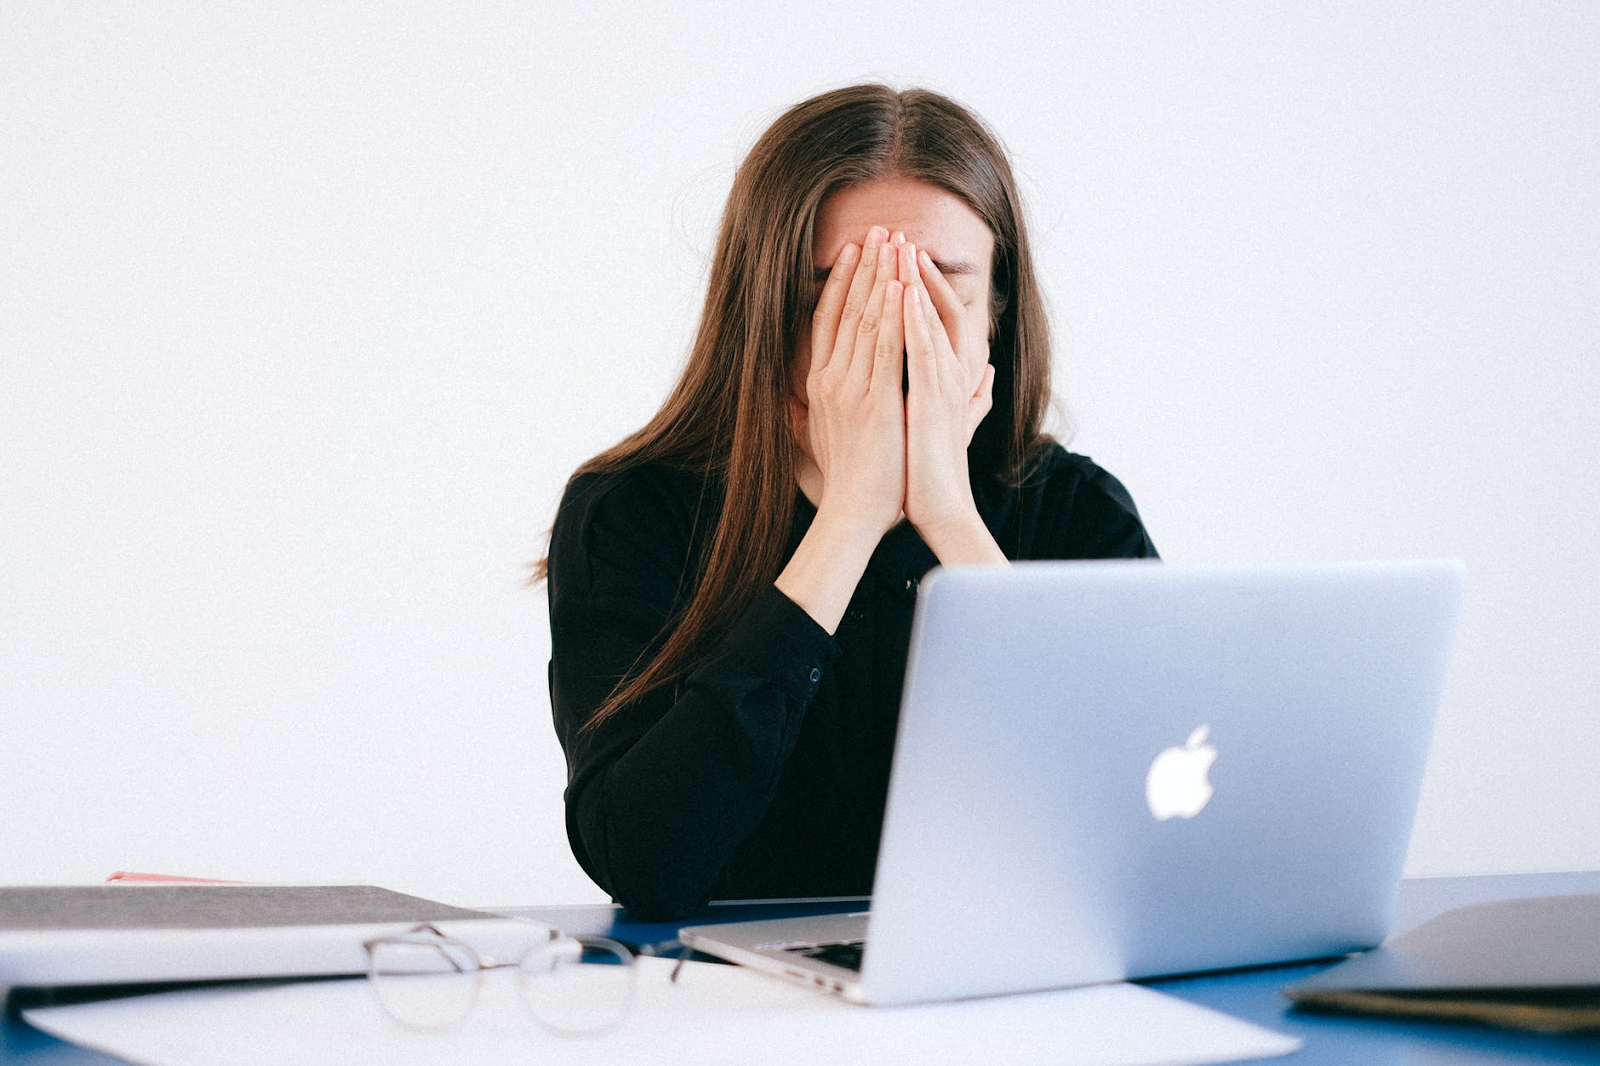 5 Signs of Employee Burnout